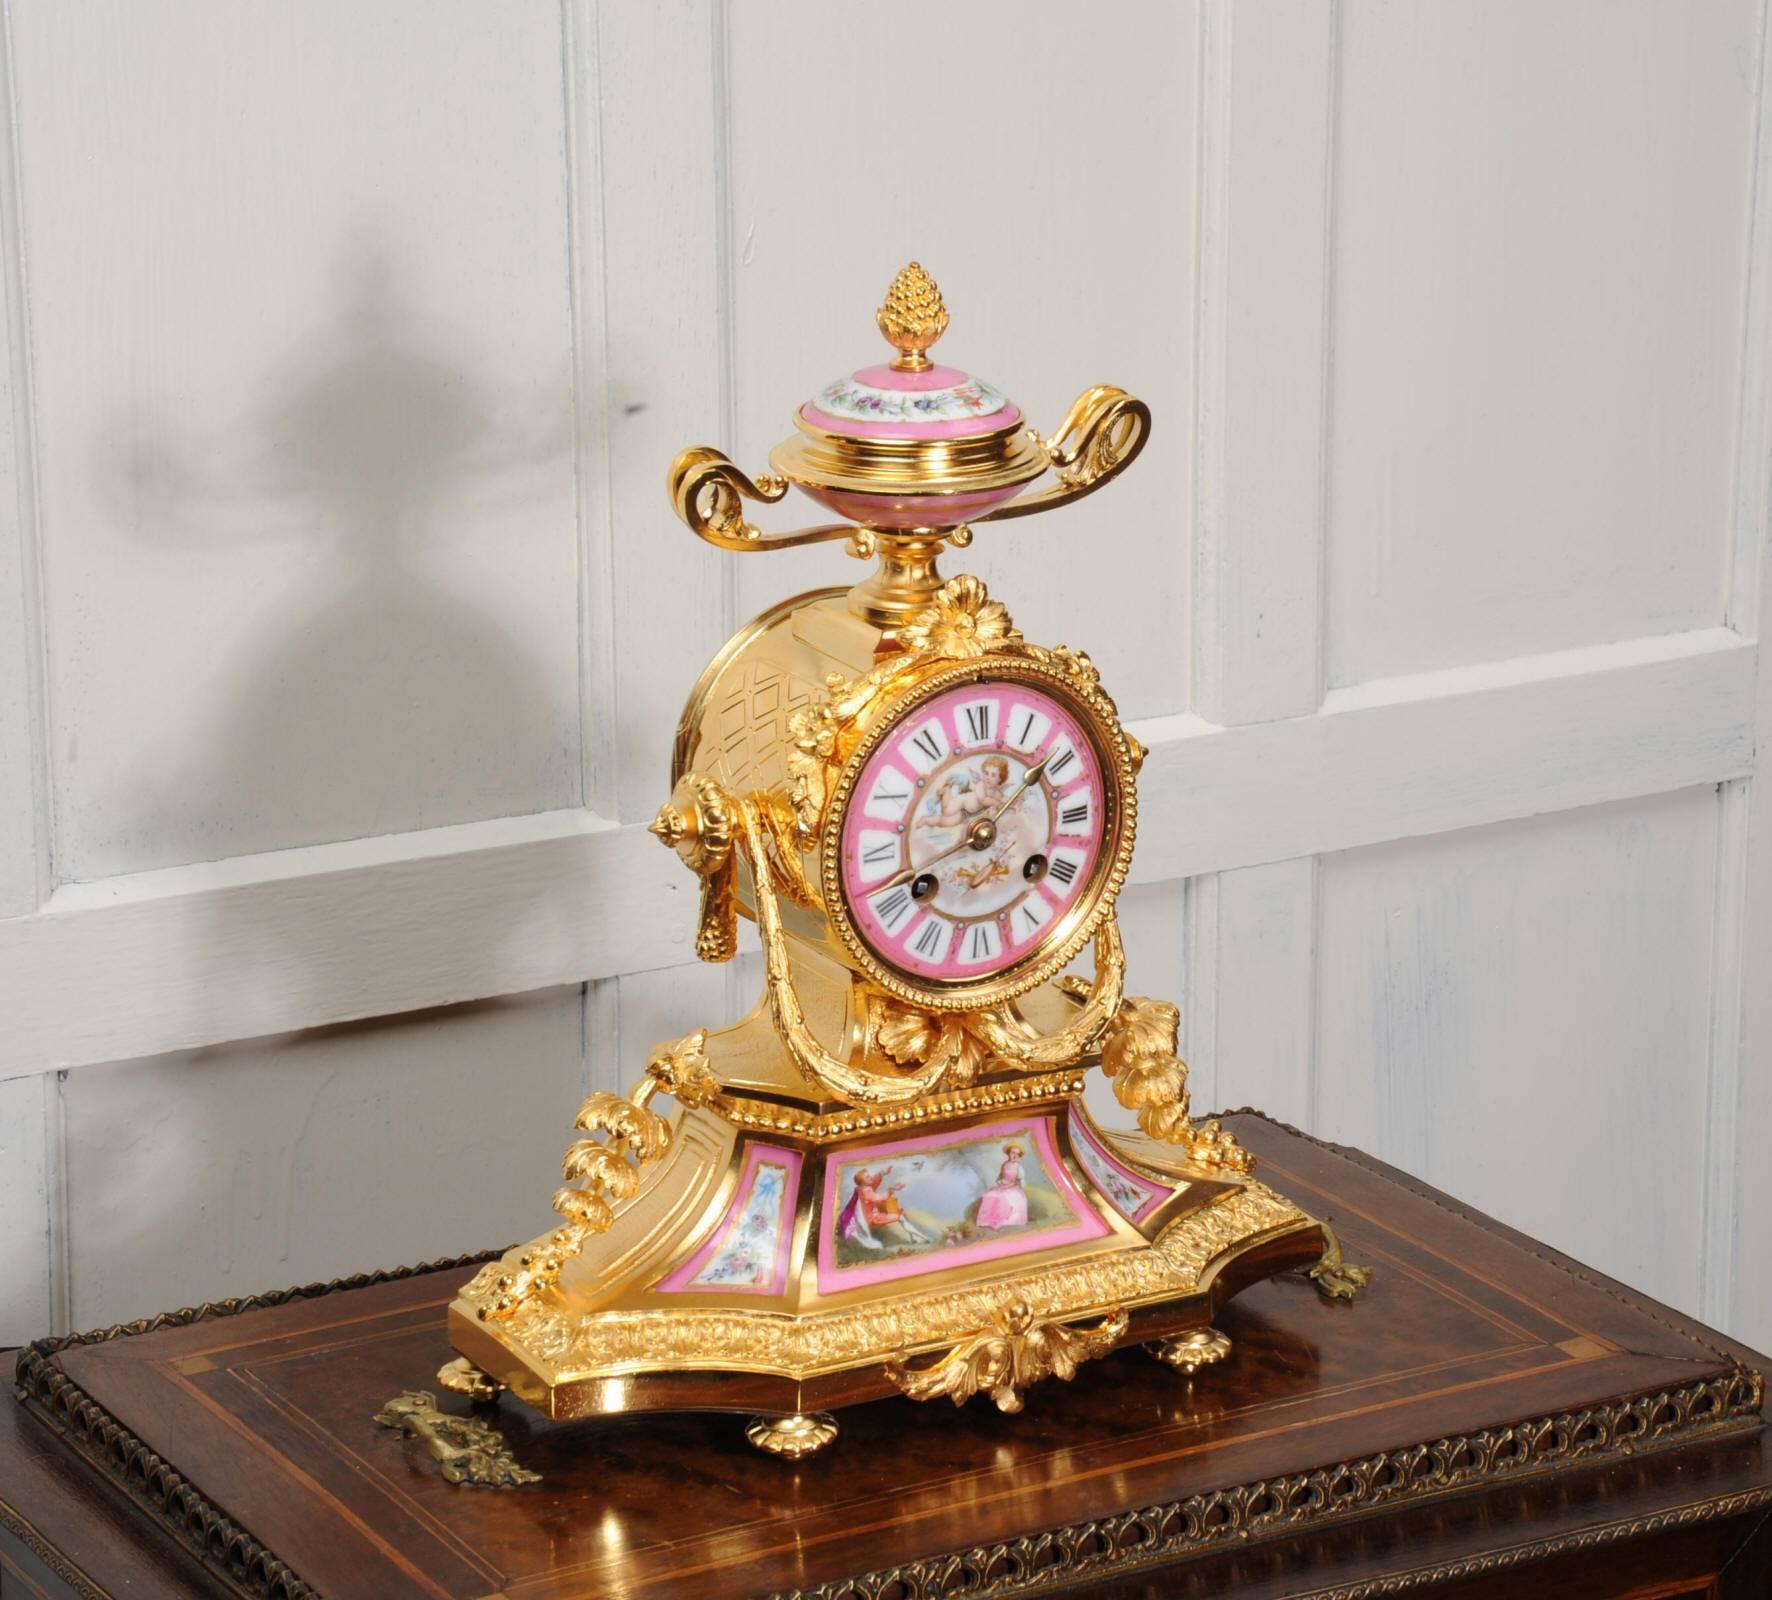 A most exquisite original antique French clock by the famous maker Japy Freres, circa 1860. It is finely modelled in ormolu (finely gilded bronze), beautifully finished and in stunning condition. It is mounted with Sevres style porcelain, each piece